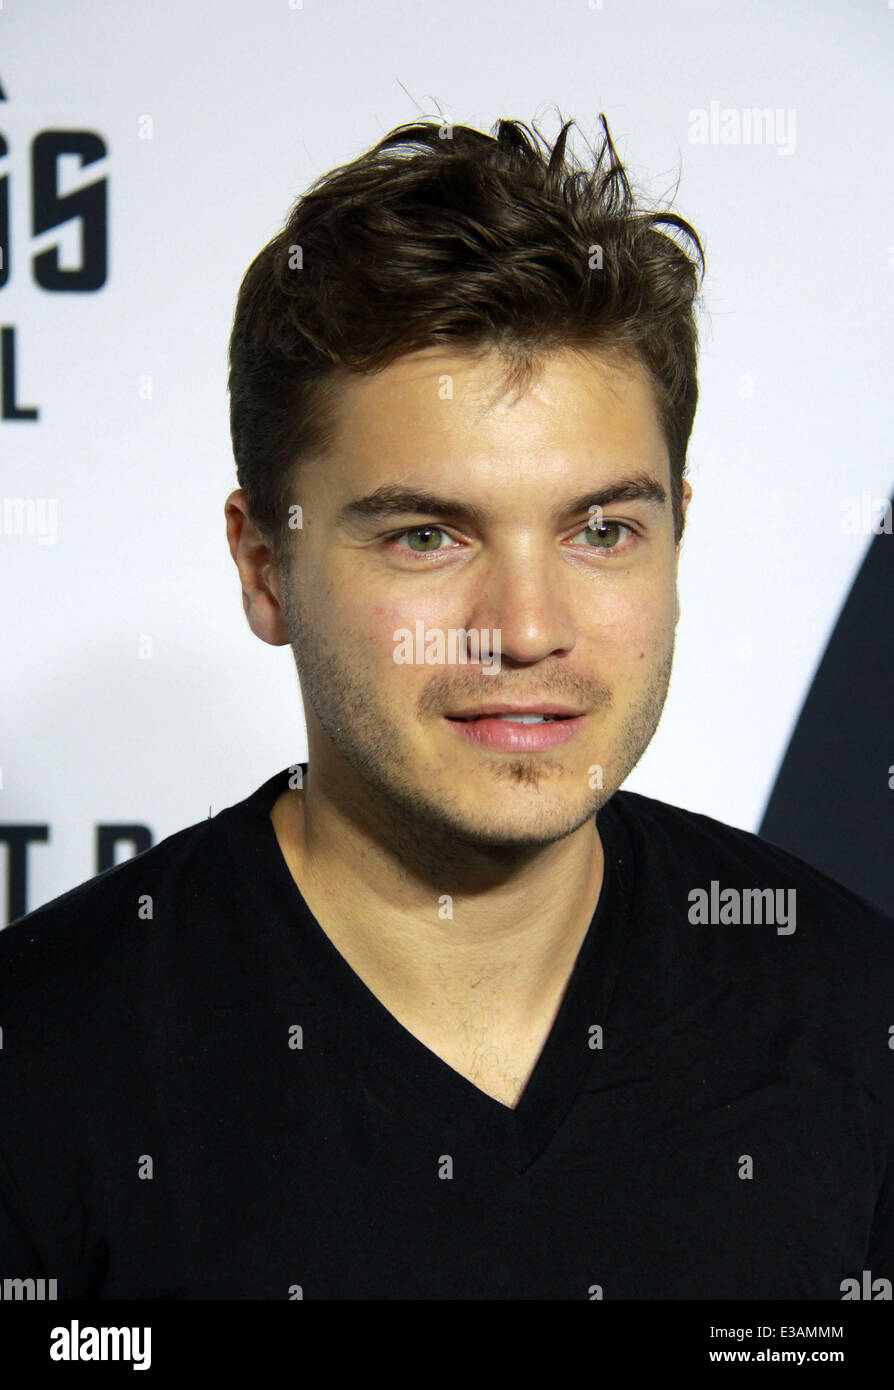 Paramount Pictures Celebrates The Blu-ray And DVD Debut Of 'Star Trek: Into Darkness' Held at California Science Center  Featuring: Emile Hirsch Where: Los Angeles, California, United States When: 11 Sep 2013 Stock Photo